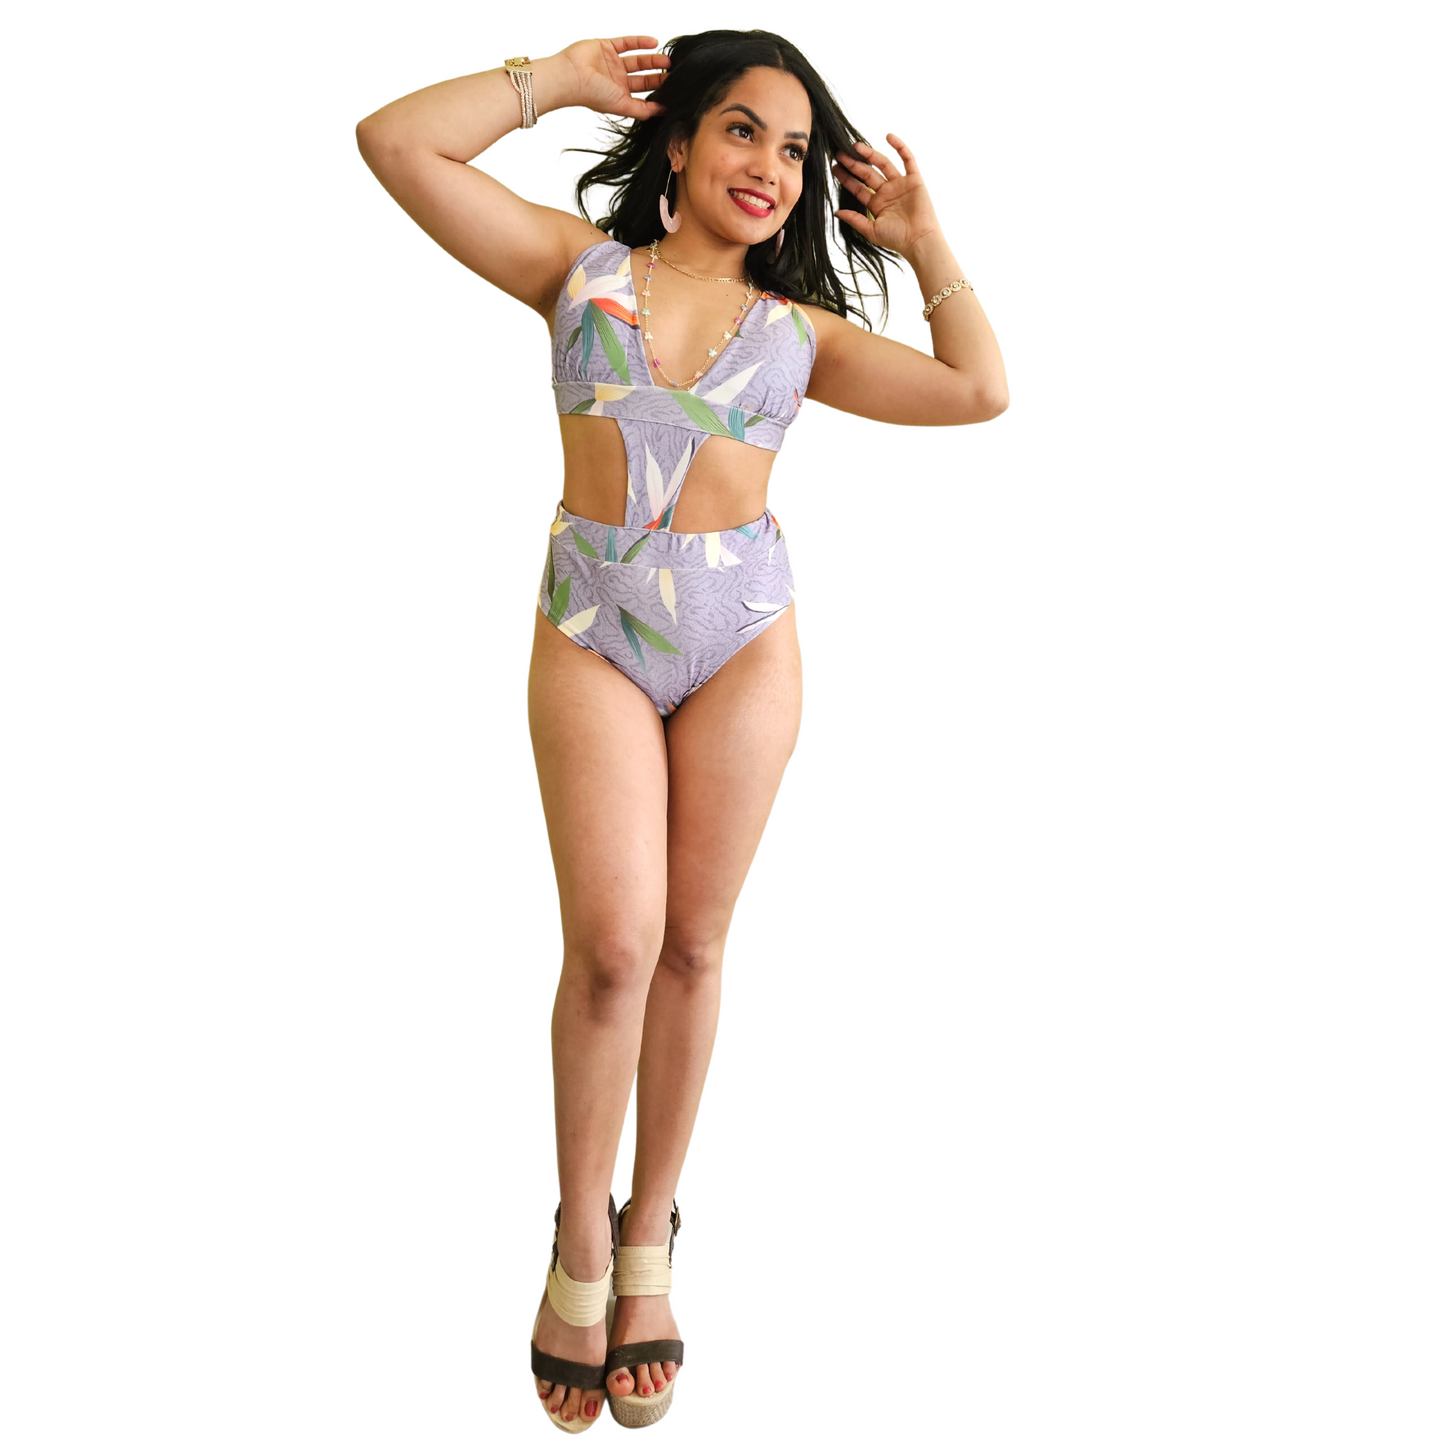 Stylish purple swimsuit with seashell pattern, side cut-out, and crisscross back ties